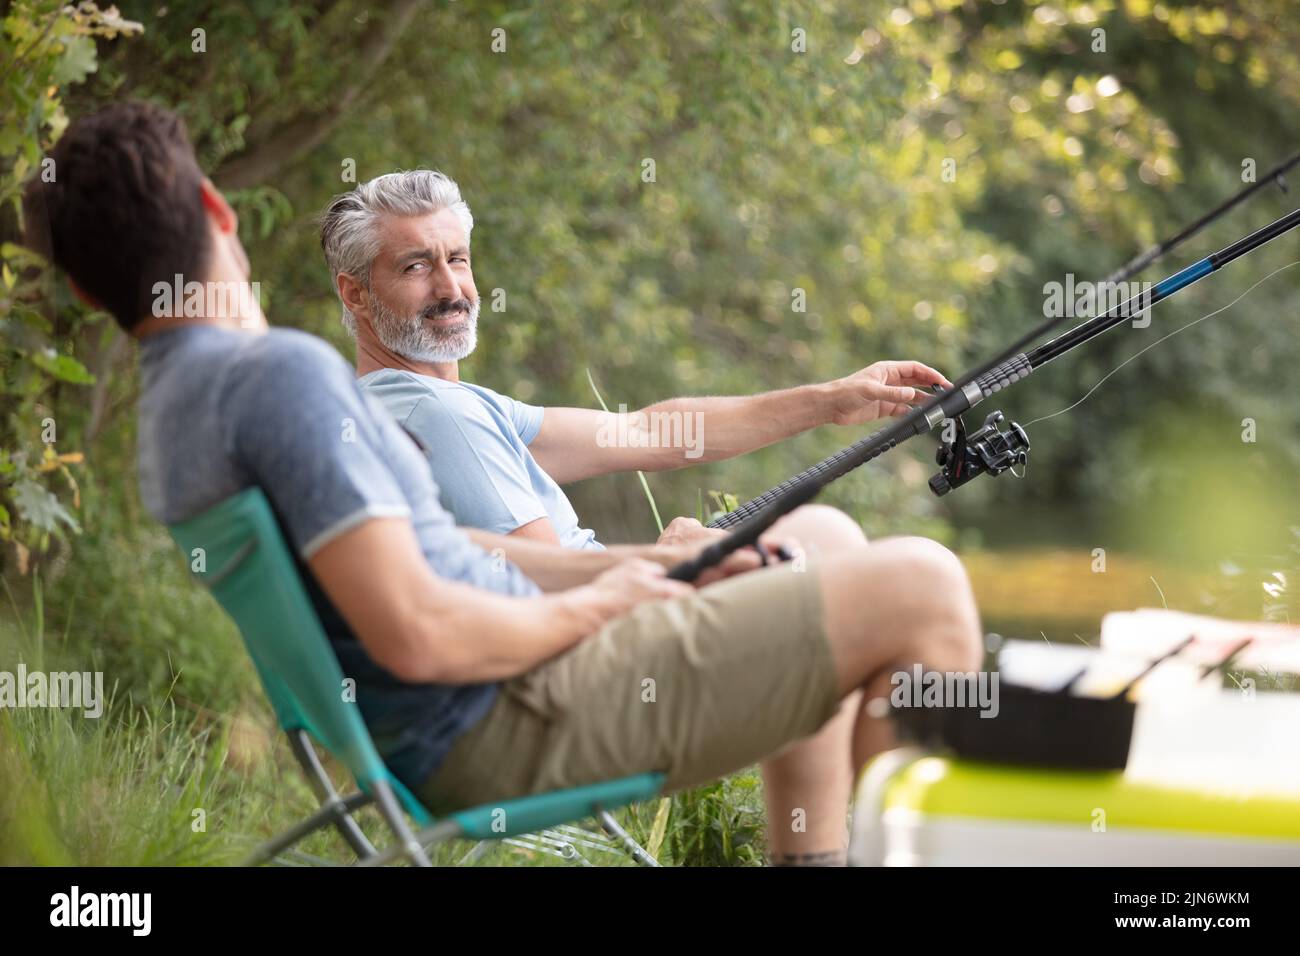 two fishermen with fishing rods catching fish Stock Photo